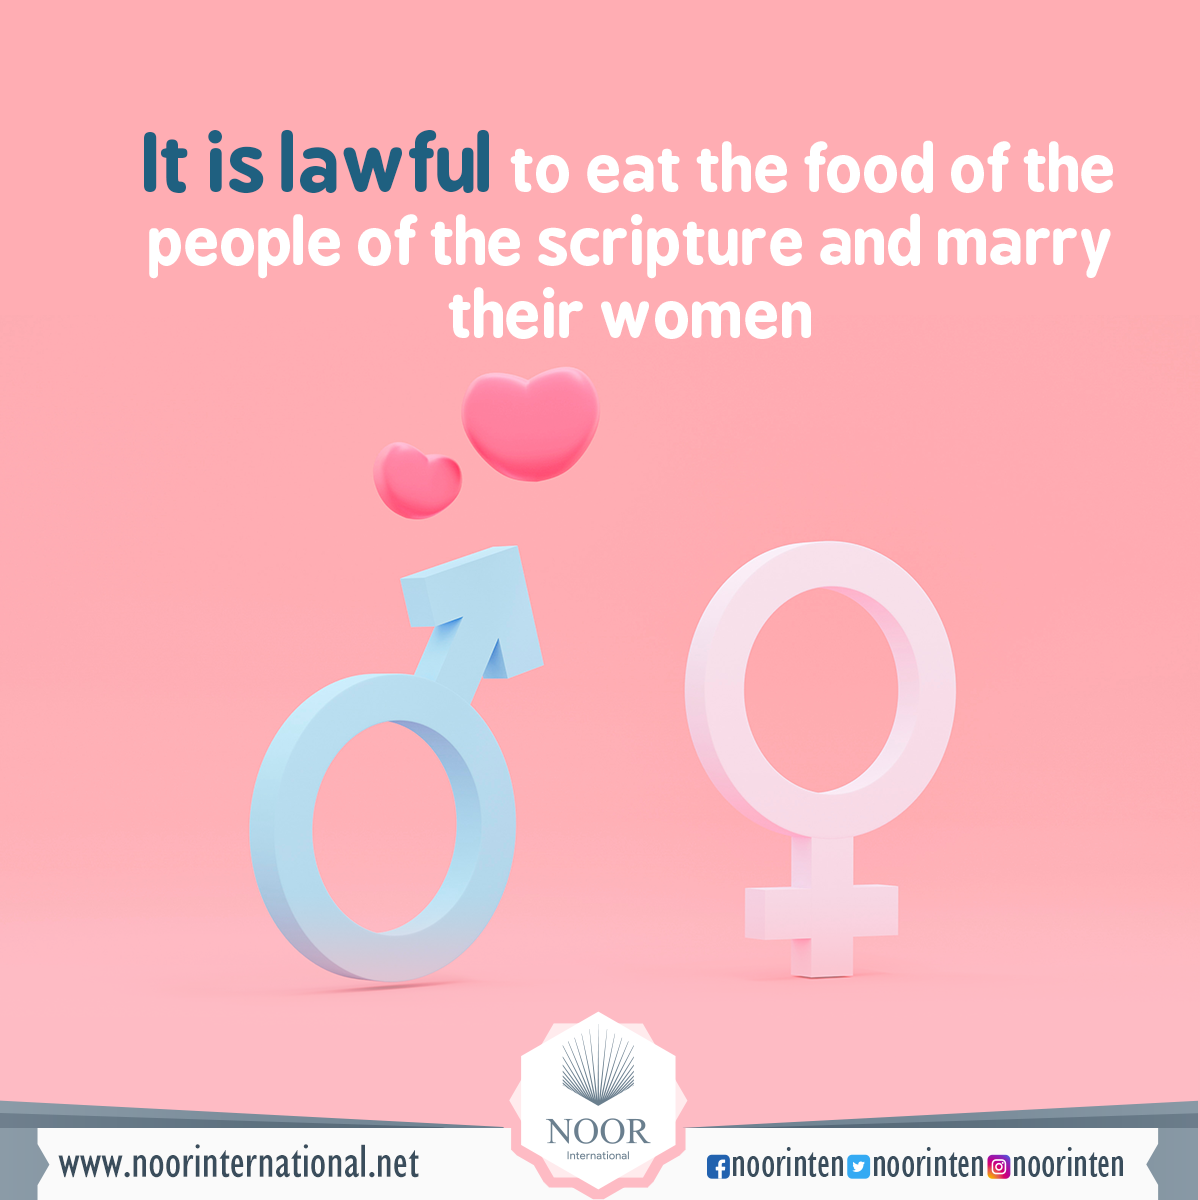 It is lawful to eat the food of the people of the scripture and marry their women.